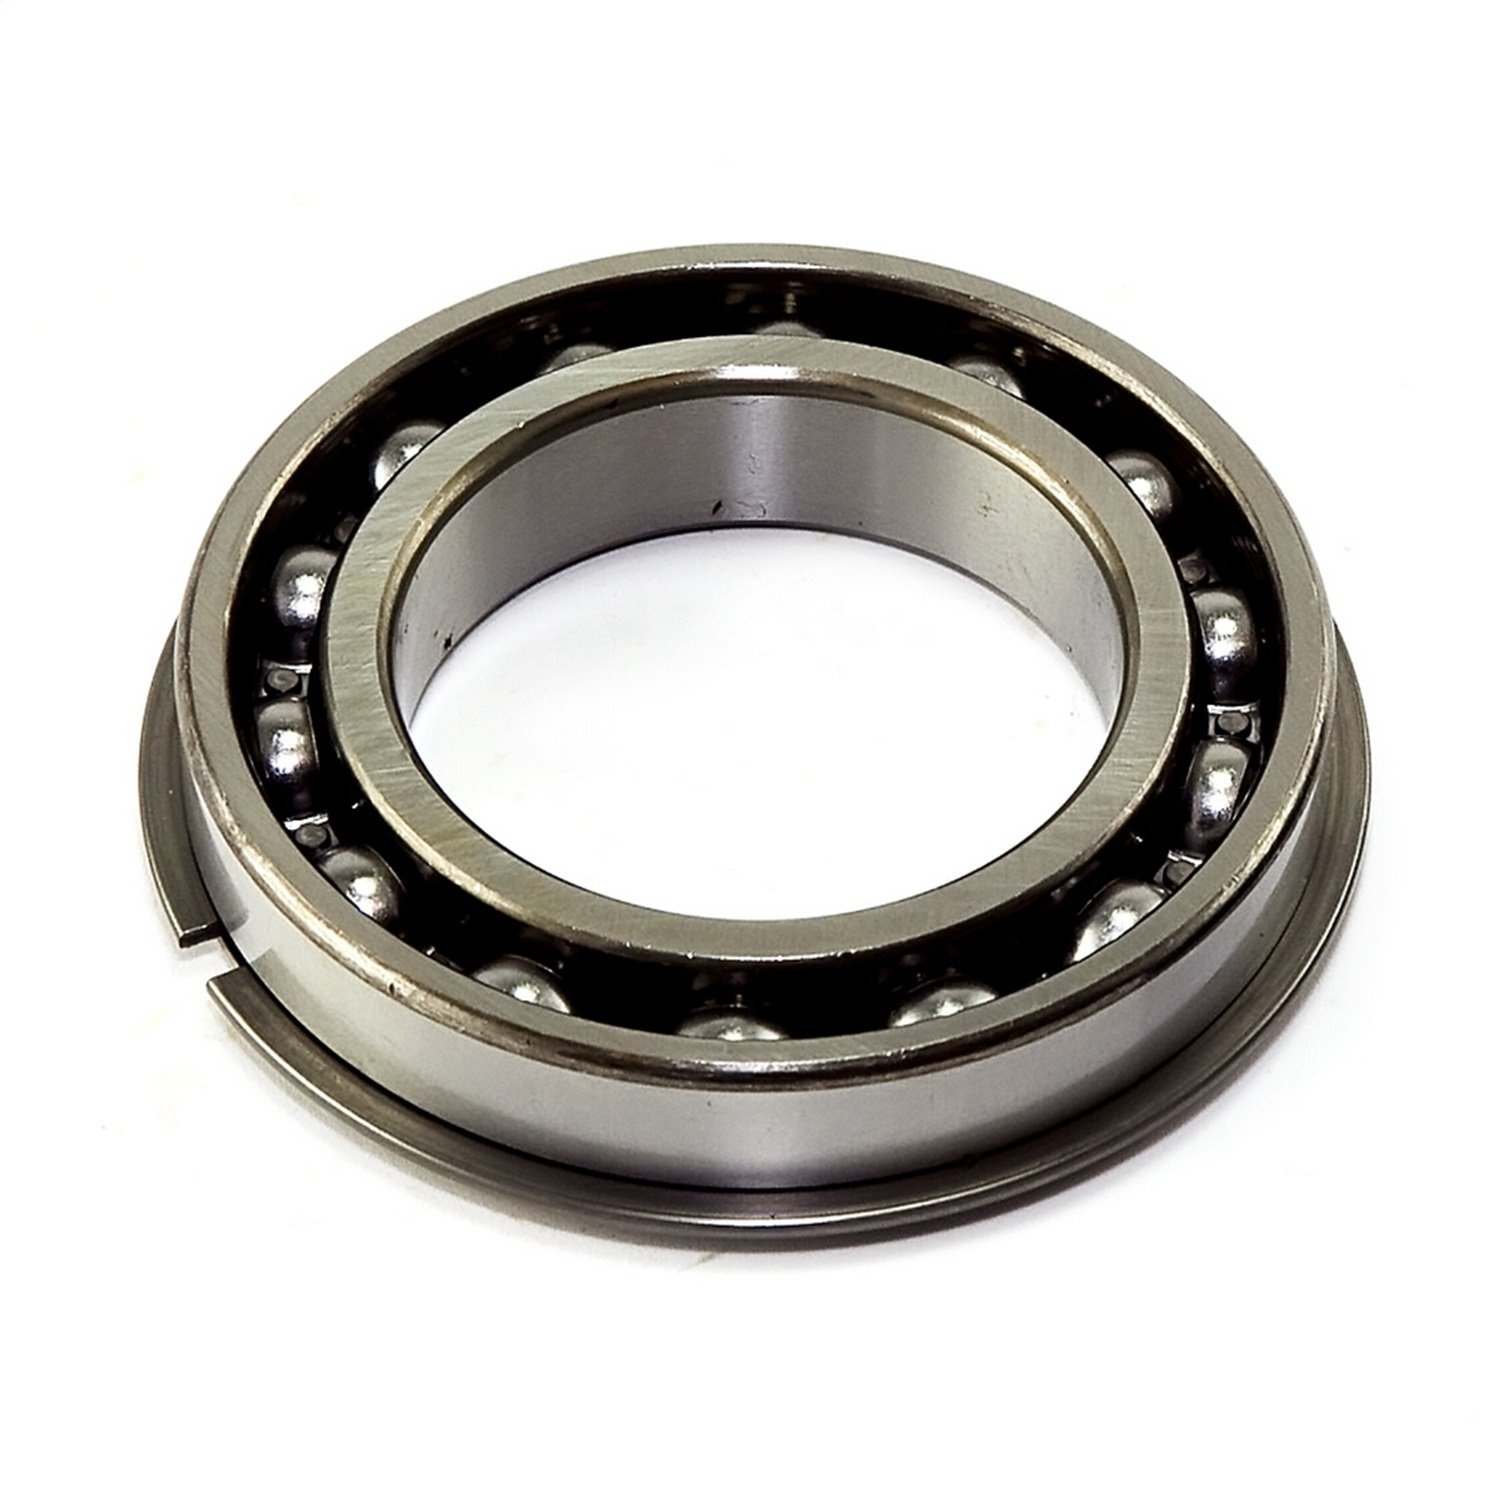 This outer input gear bearing fits the NP231 and NP242 transfer case in 87-95 Jeep Wrangler. 87-01 C